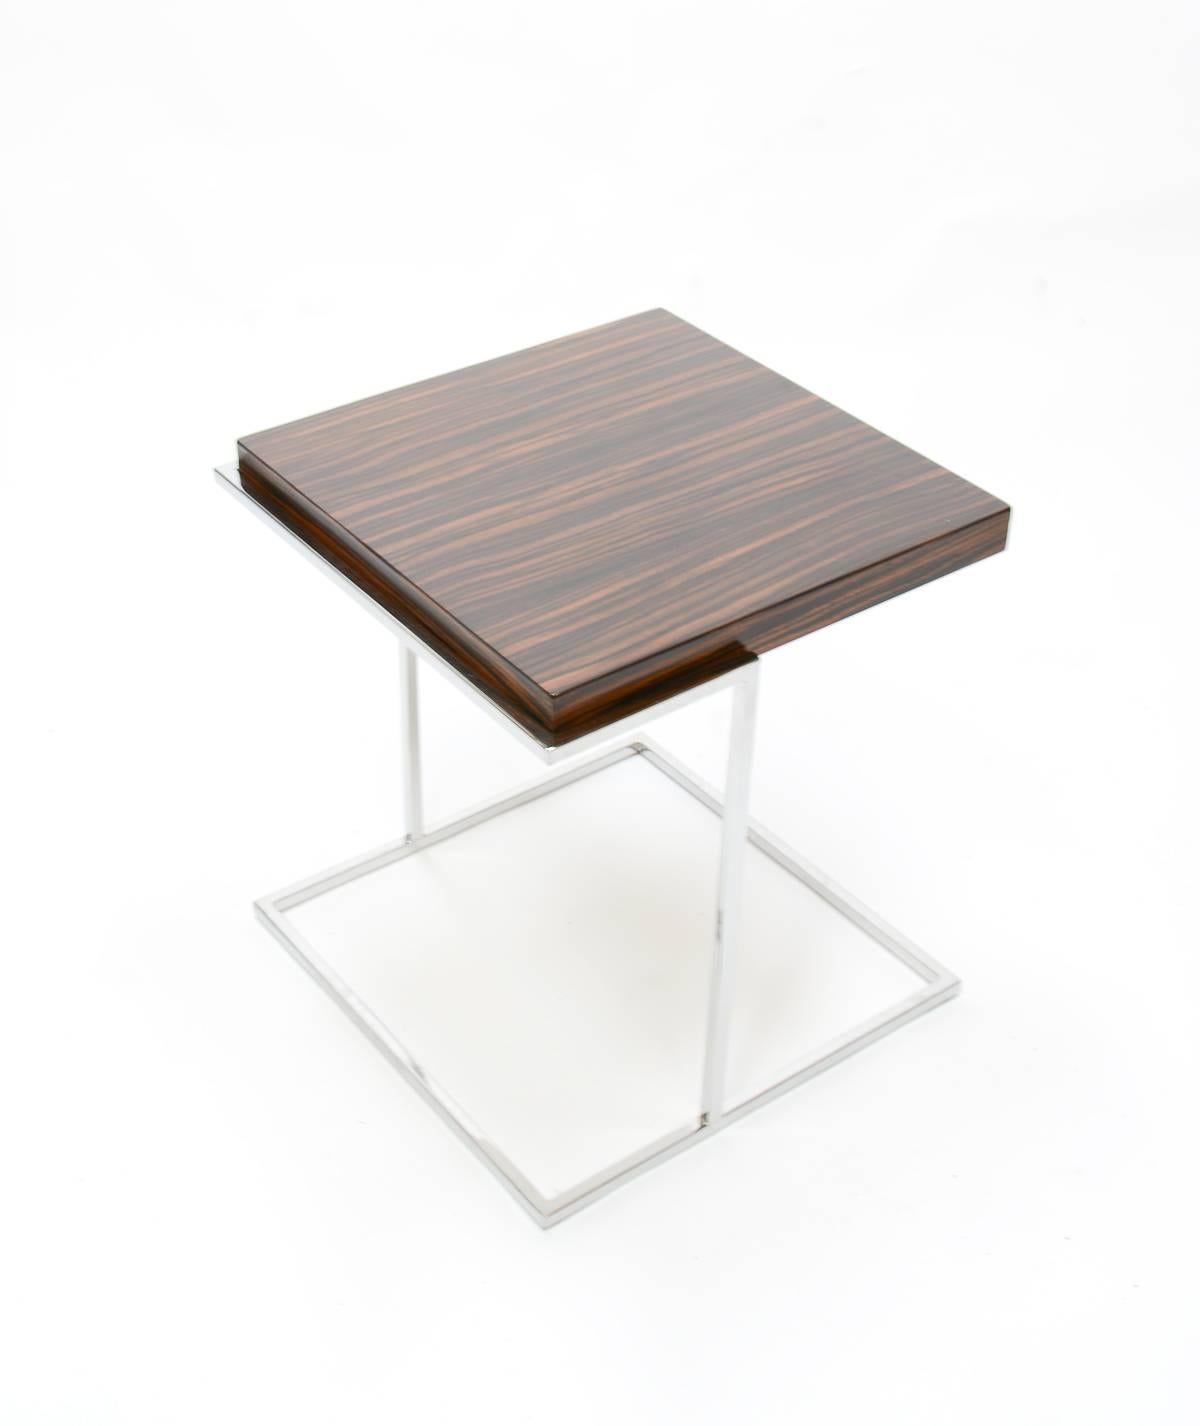 Pair of Stunning Zebra Wood and Chrome Cantilever Side Tables In Good Condition For Sale In Portland, OR